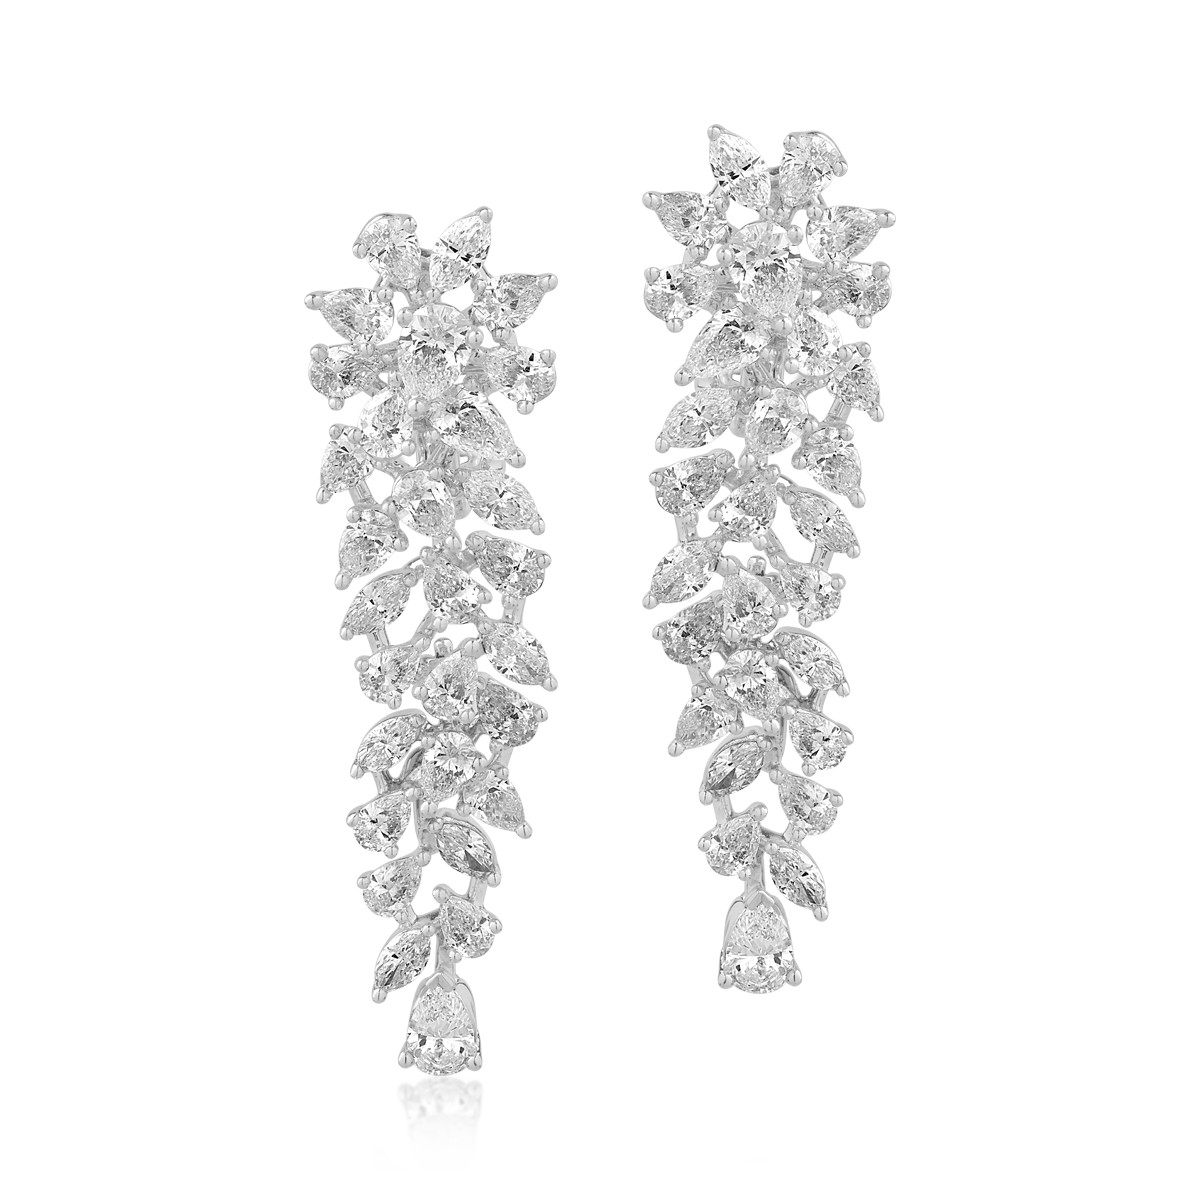 18K white gold earrings with 5.63ct diamonds